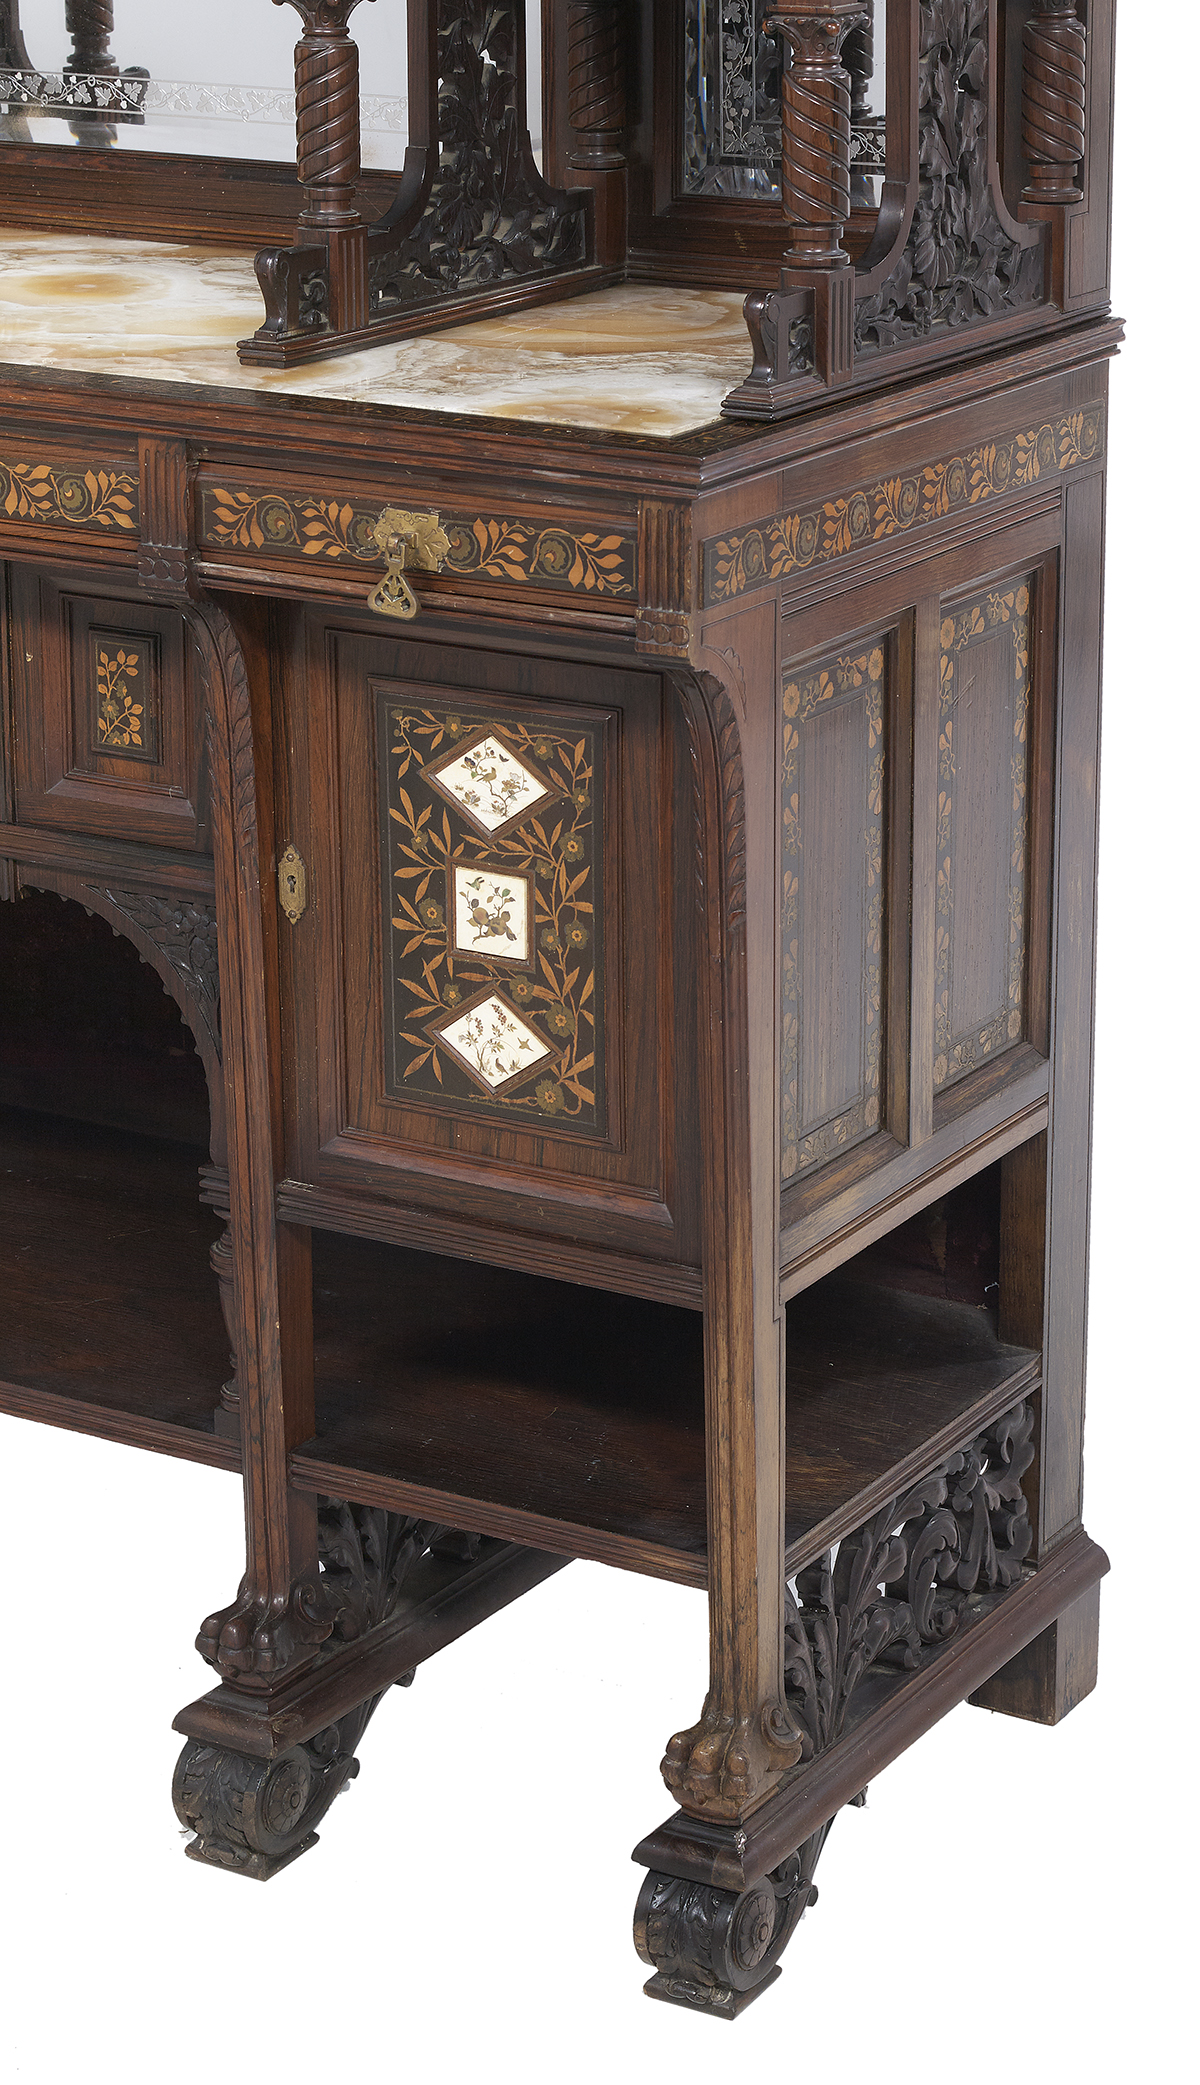 American Aesthetic Movement Rosewood Cabinet - Image 4 of 16